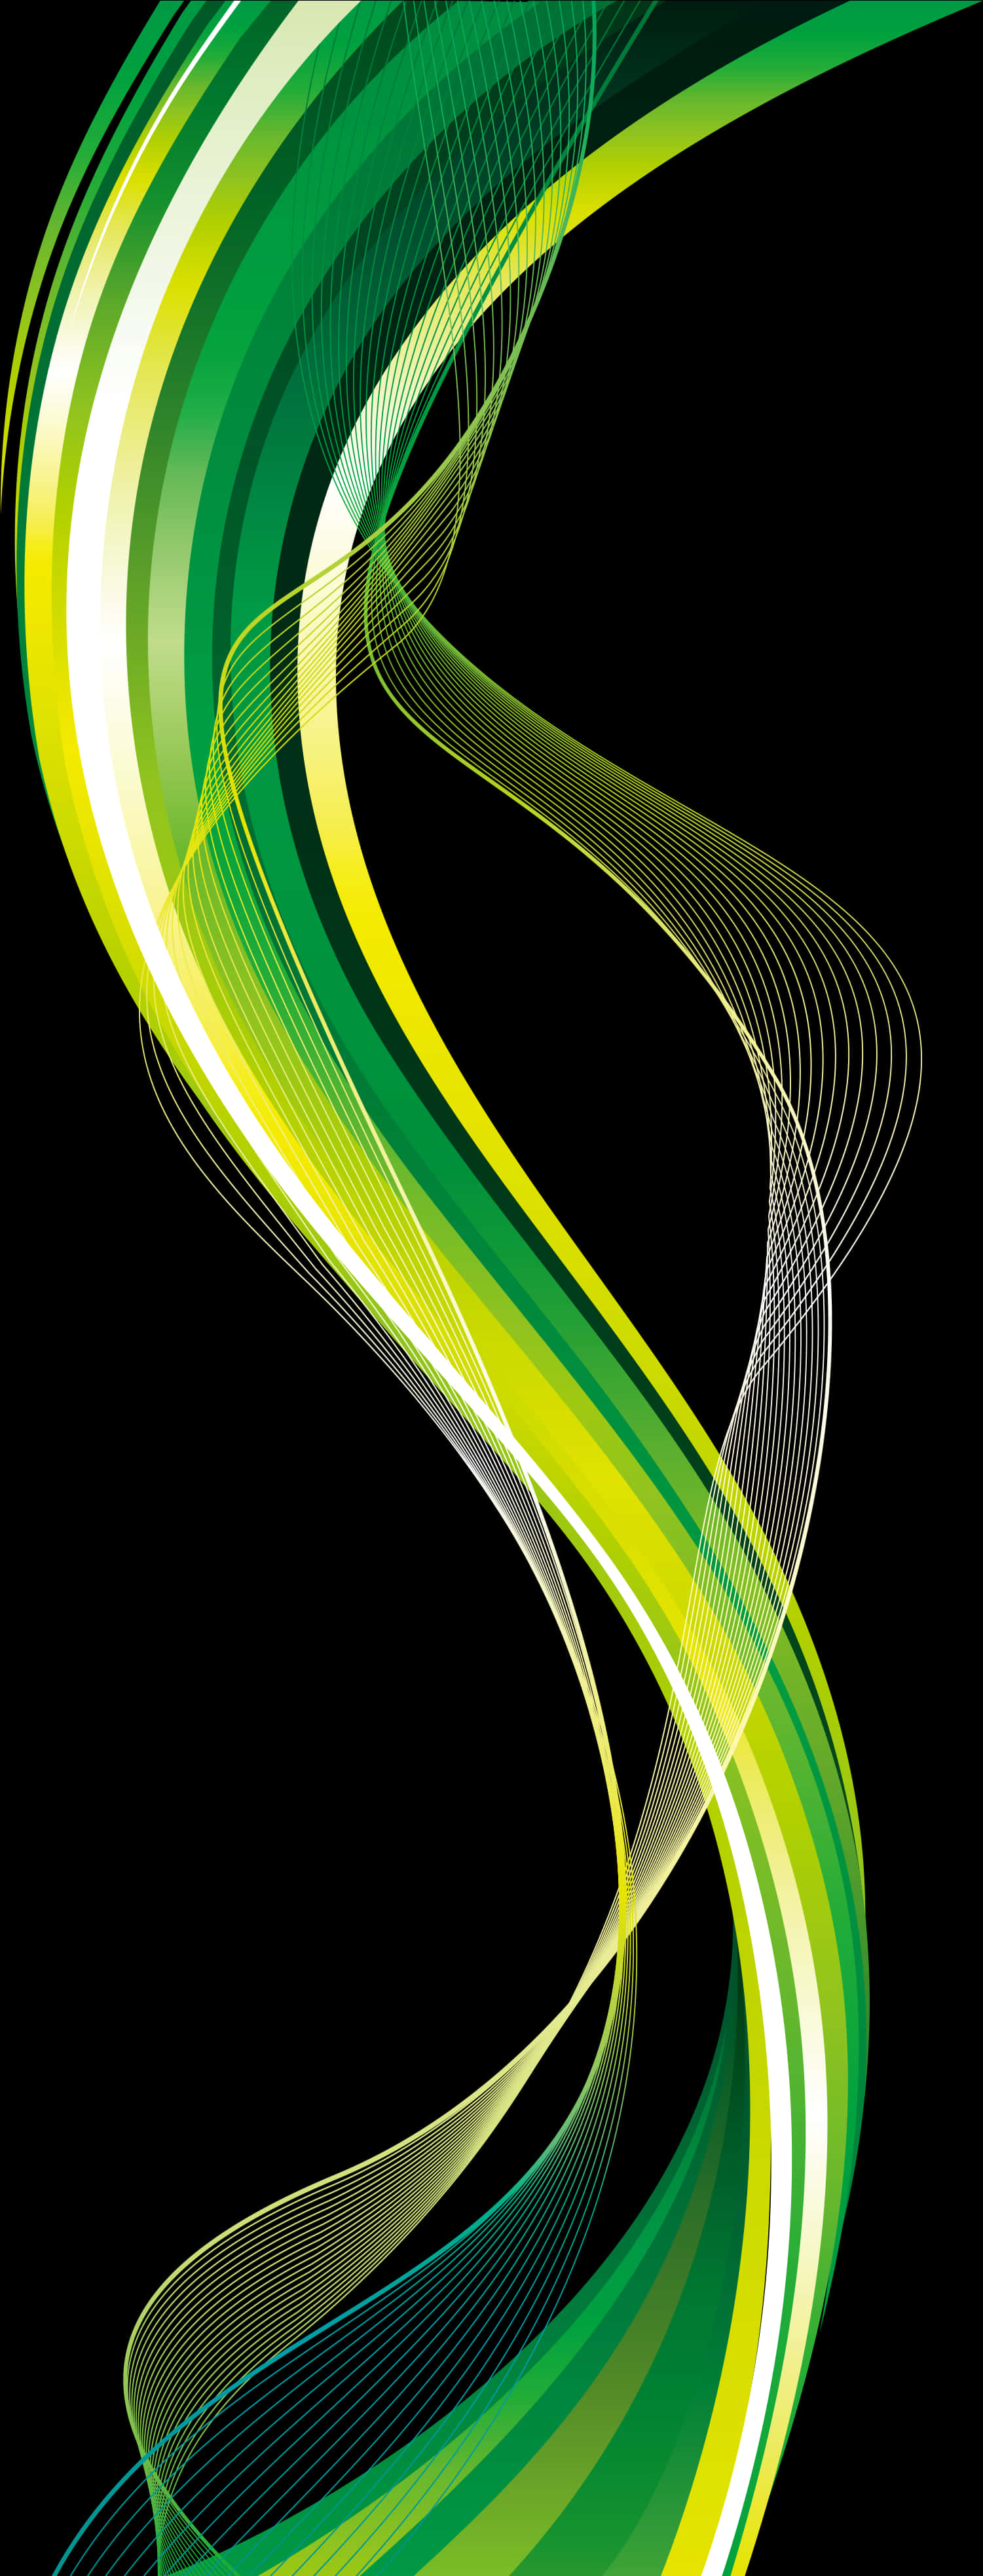 Abstract Green Wave Design PNG image